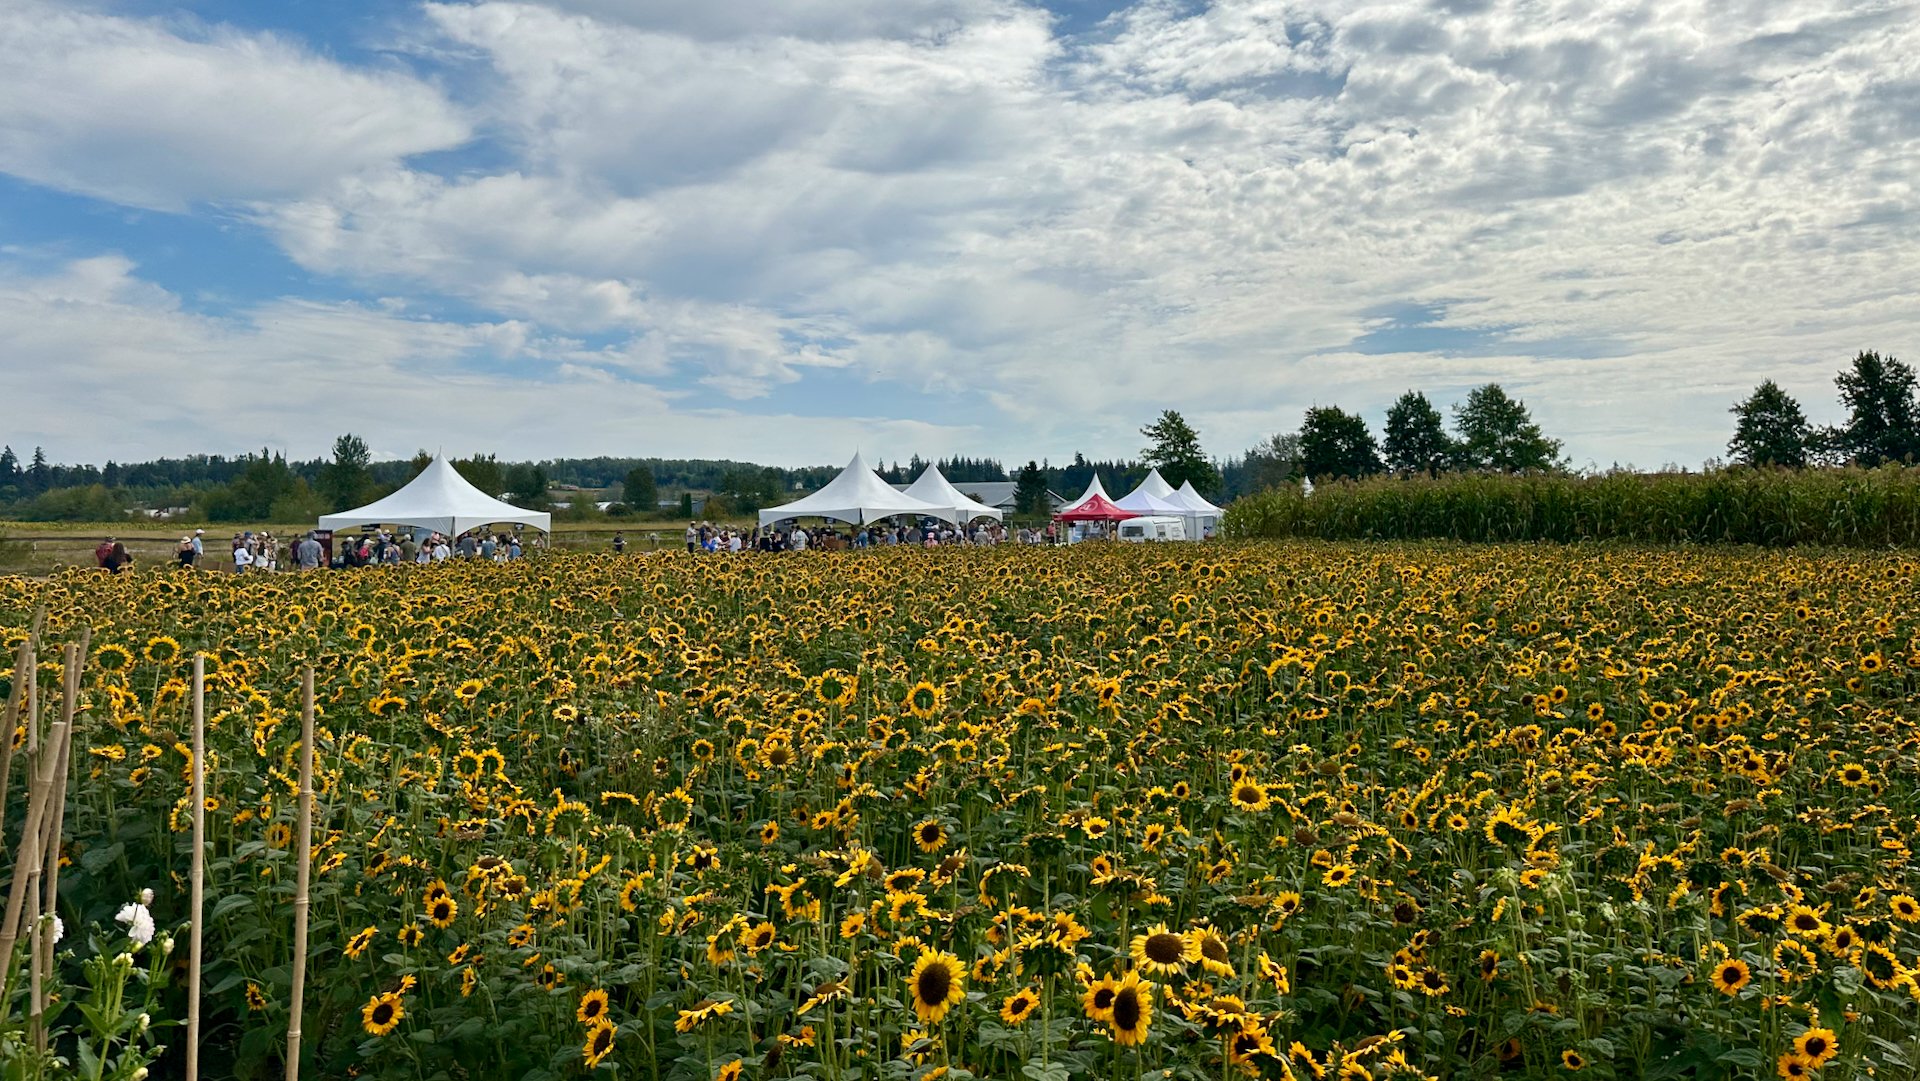  The setting was amazing, with the tents set in fields of sunflowers. 